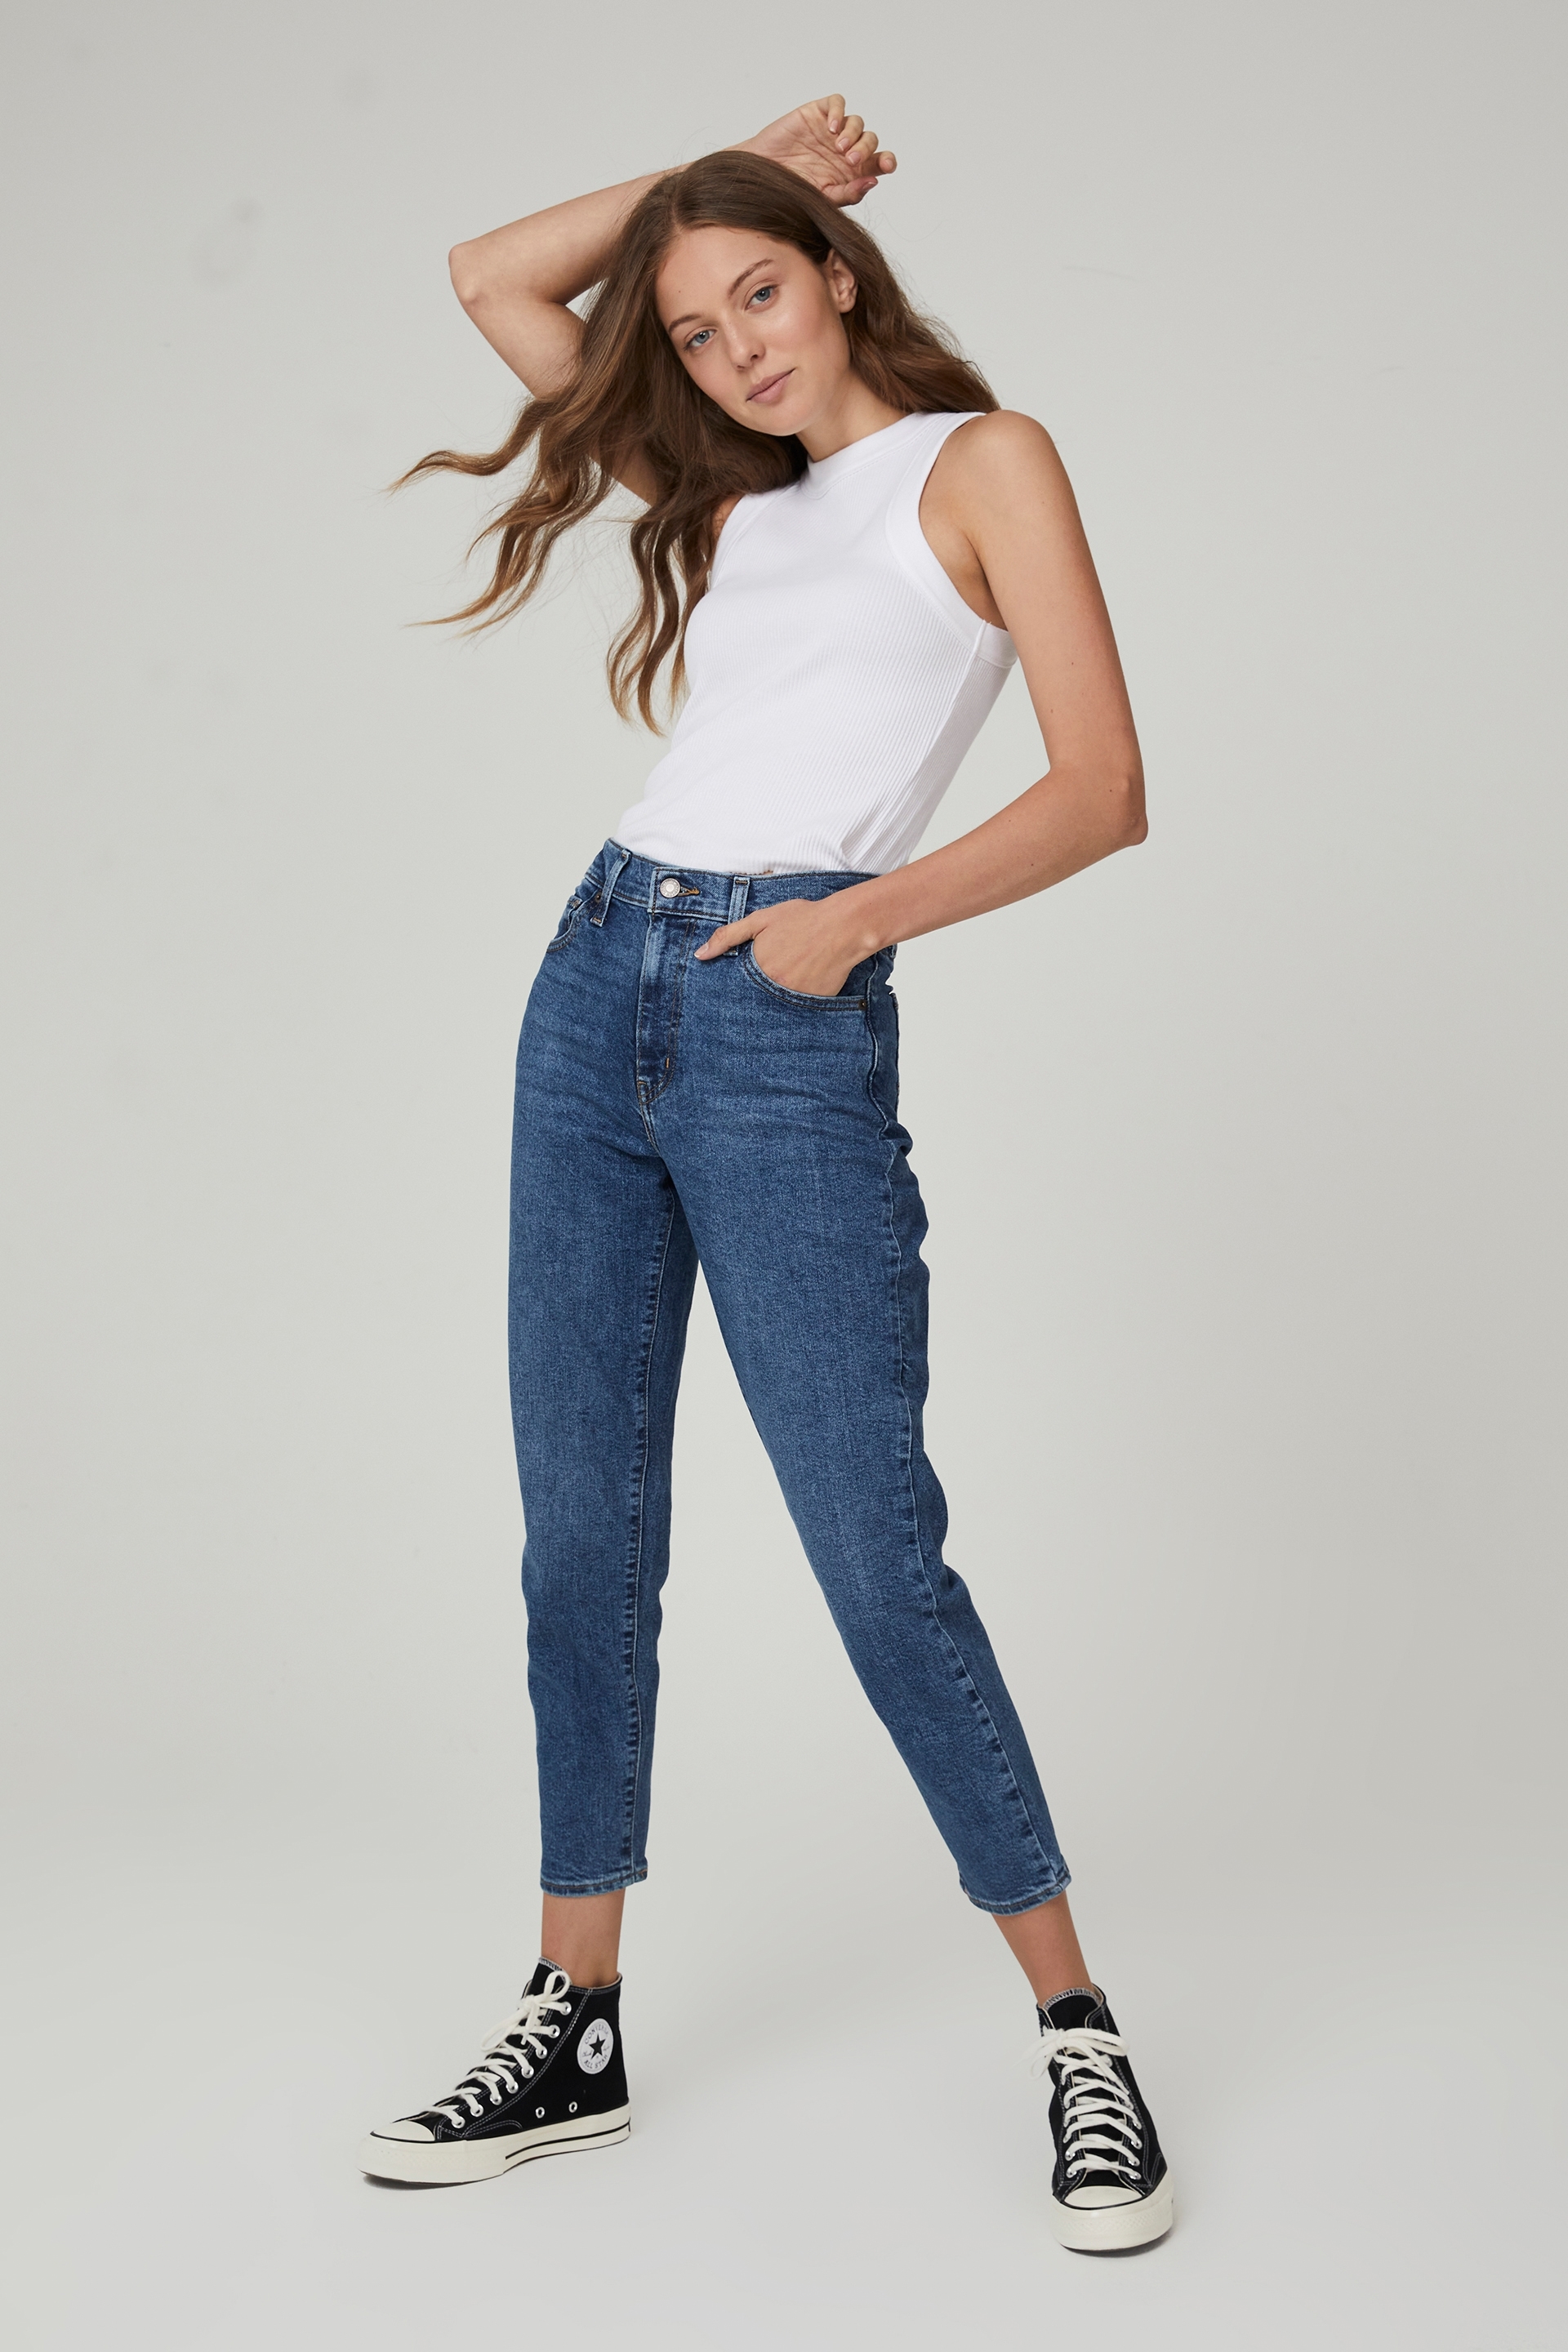 Levis - Levis High Waisted Mom Jean - Fit the bill